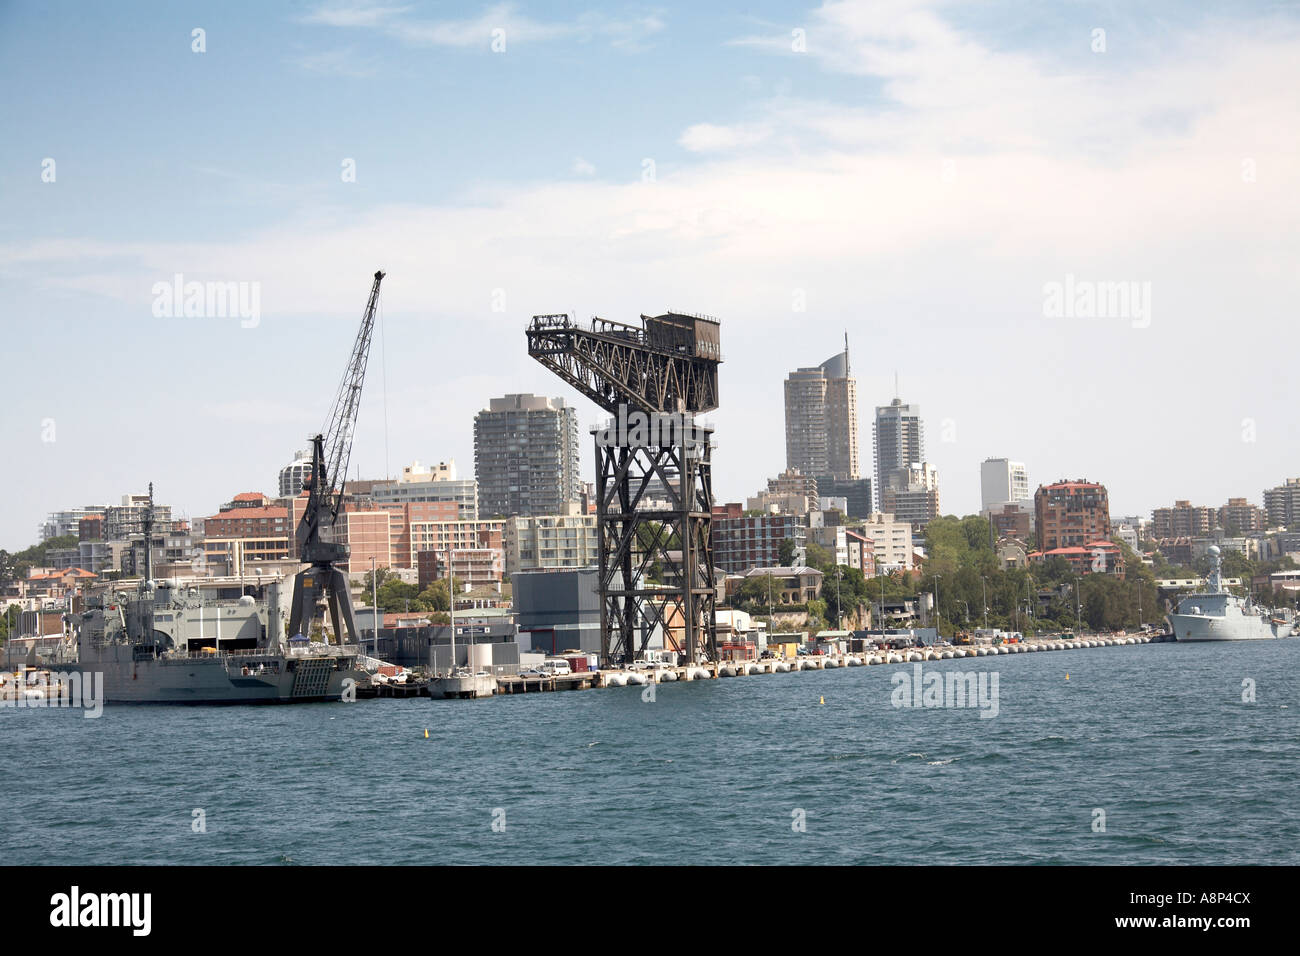 Potts Point and Woolloomooloo bay Garden Island RAN Naval base dock with warships and cranes in Sydney New South Wales NSW Stock Photo